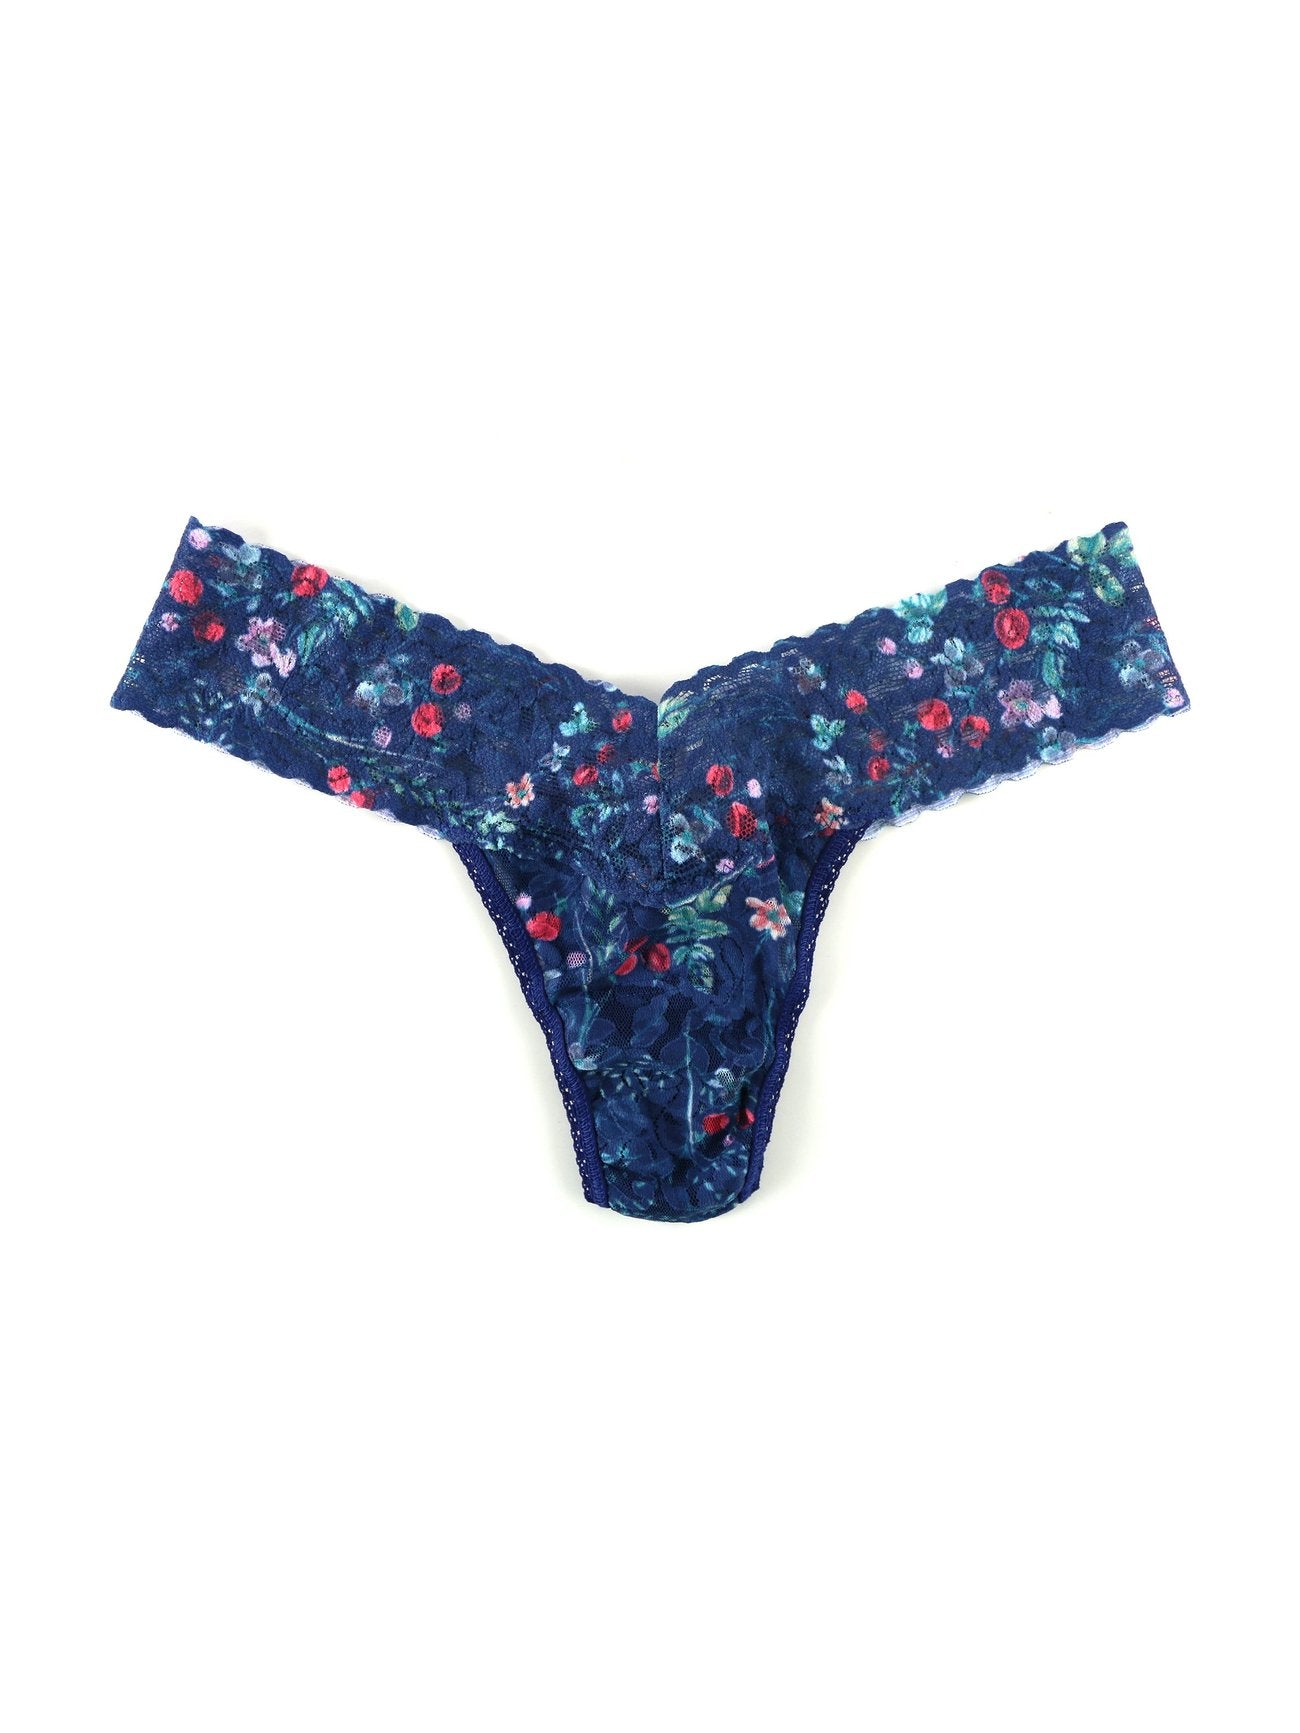 Hanky Panky Low Rise - Juniper Berry — Distinctively Hers